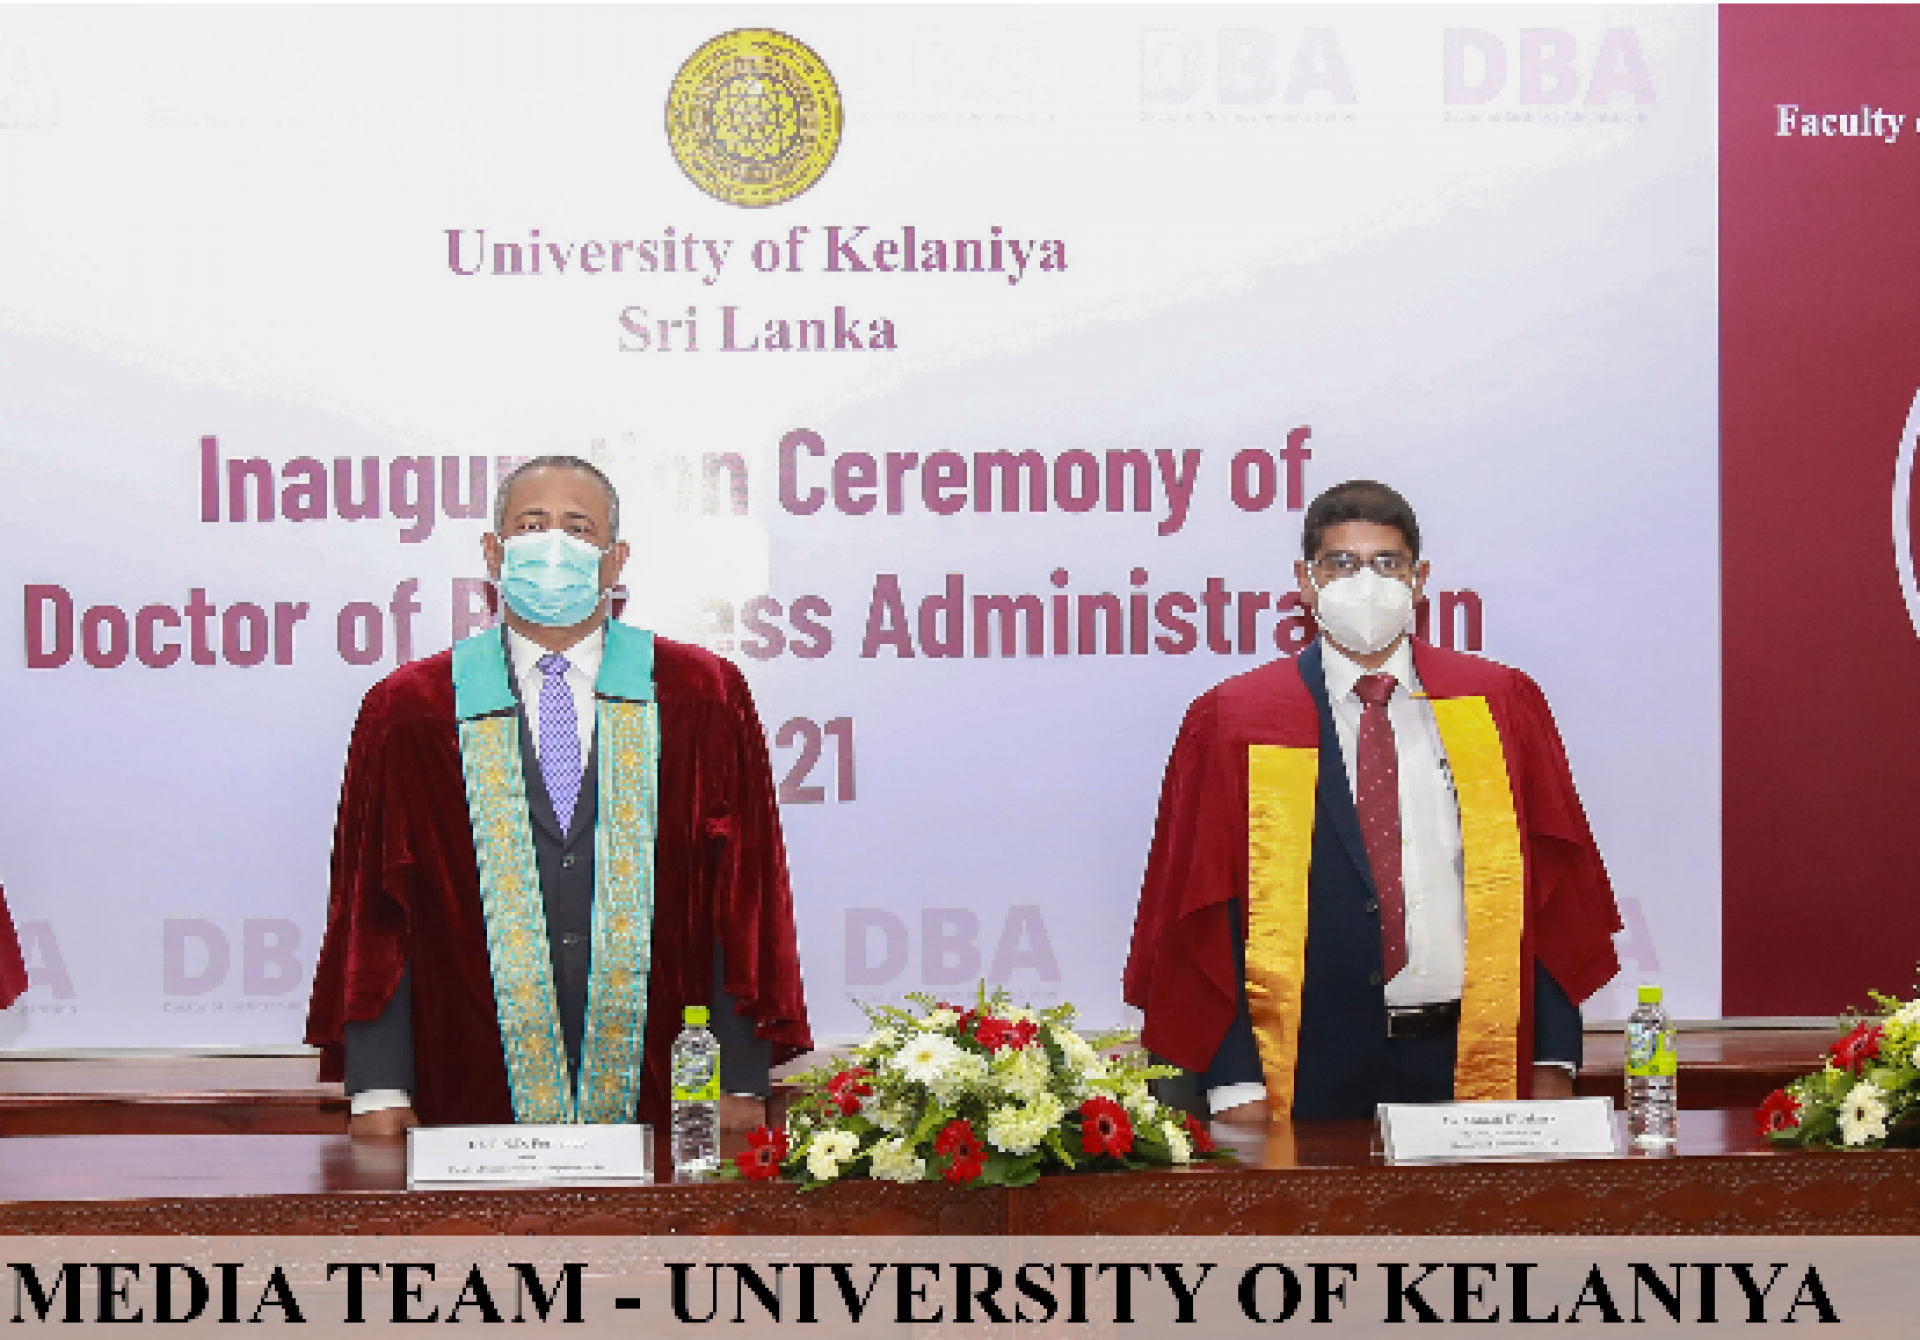 Inauguration Ceremony of the Doctor of Business Administration 2021